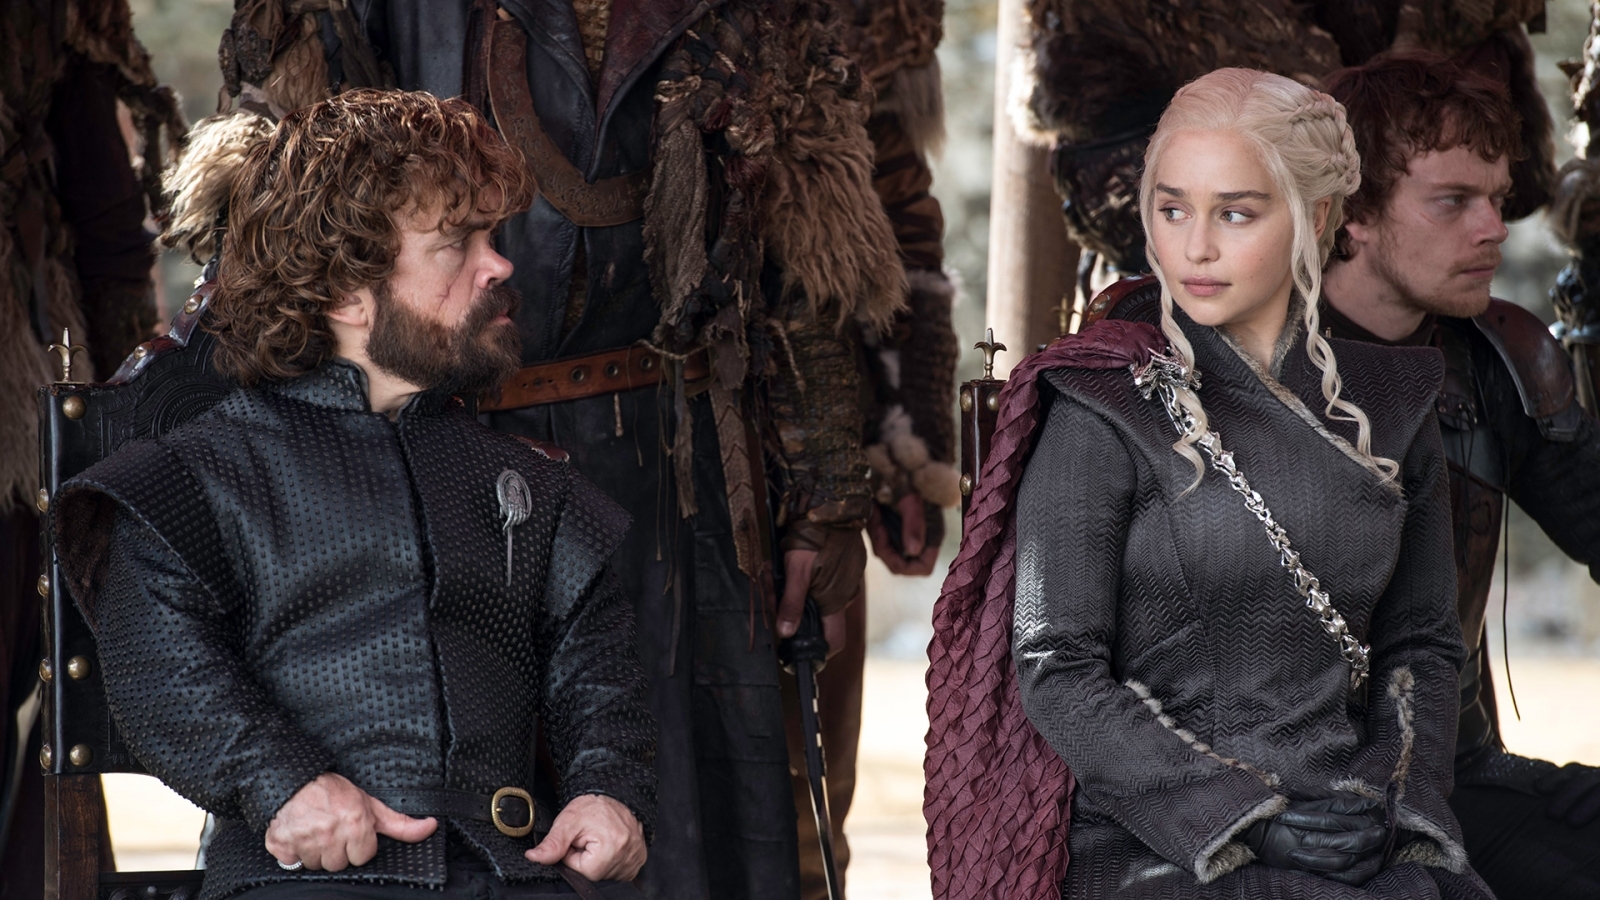 Will Tyrion Betray Jon And Danny Game Of Thrones Director Says The Lannister Is Three Steps Ahead